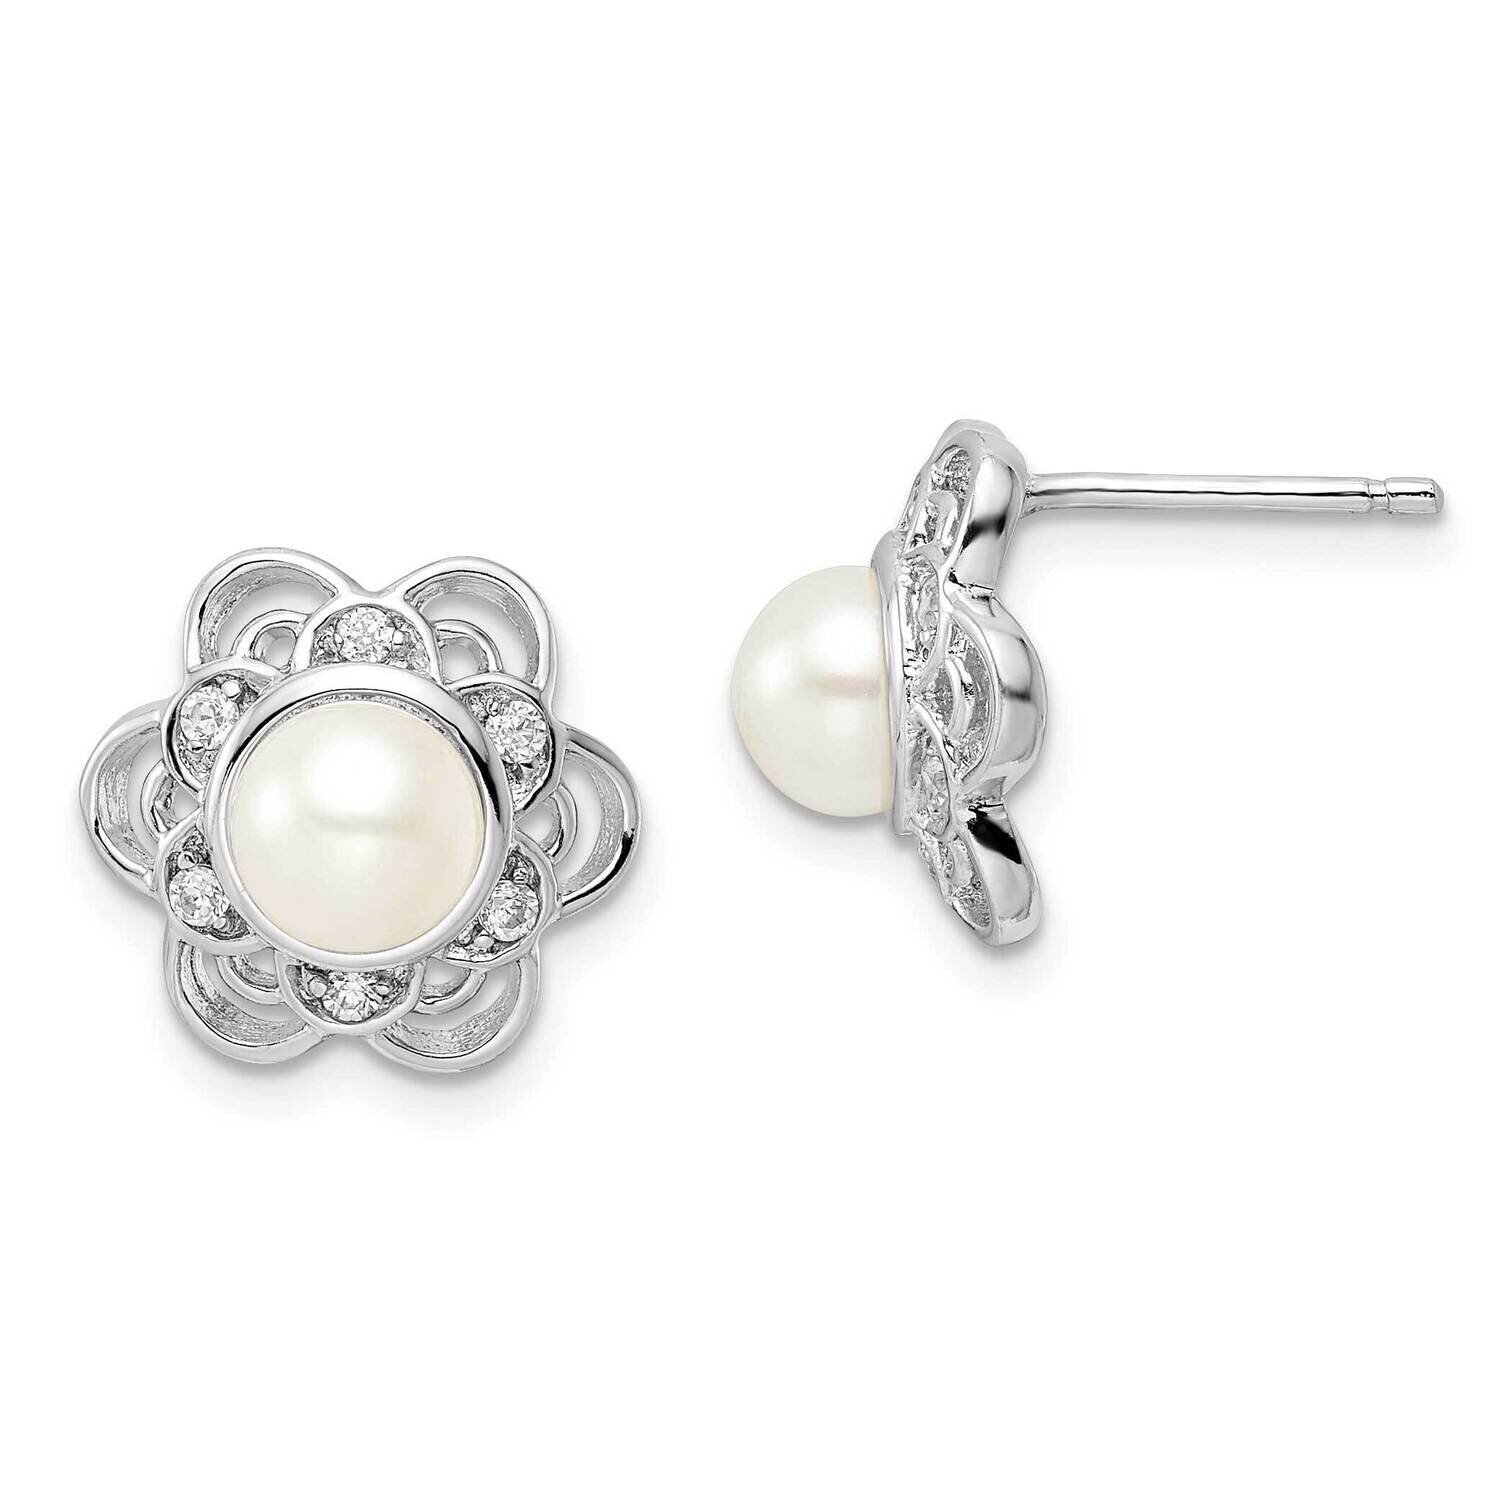 Cheryl M Fw Cultured Pearl Floral Design Post Earrings Sterling Silver Rhodium-plated QCM1469